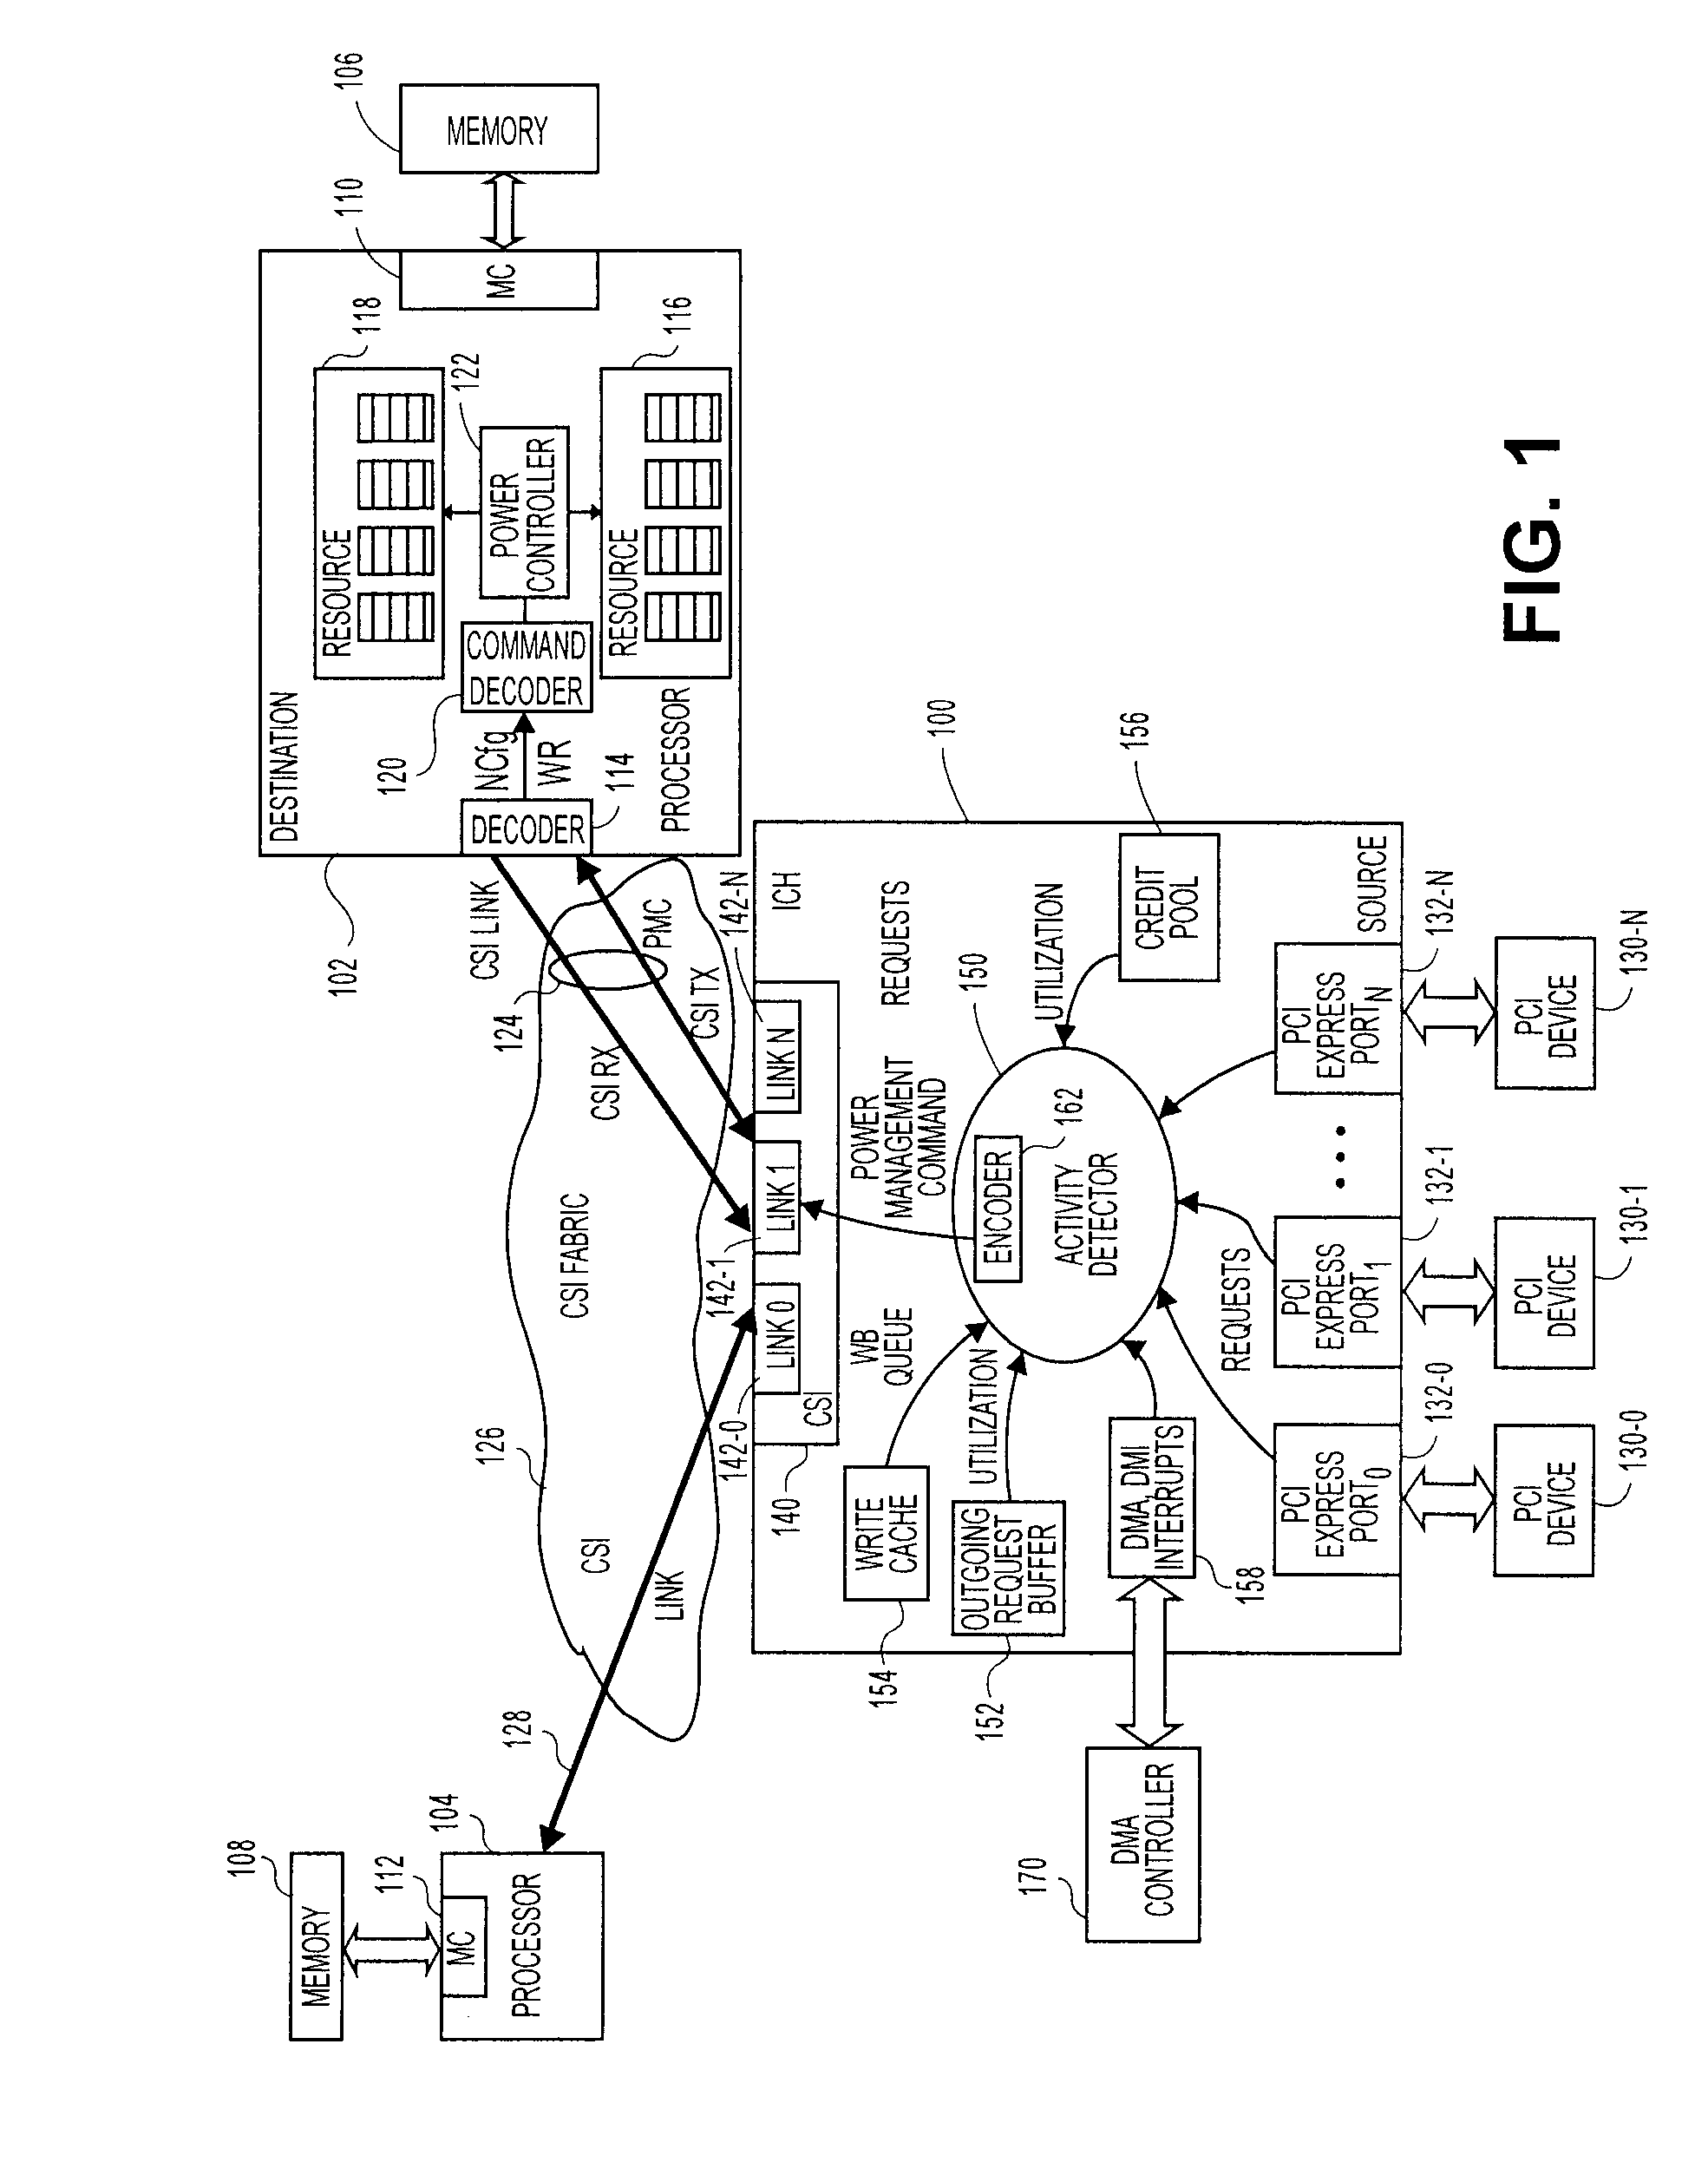 Method, system, and apparatus for a core activity detector to facilitate dynamic power management in a distributed system